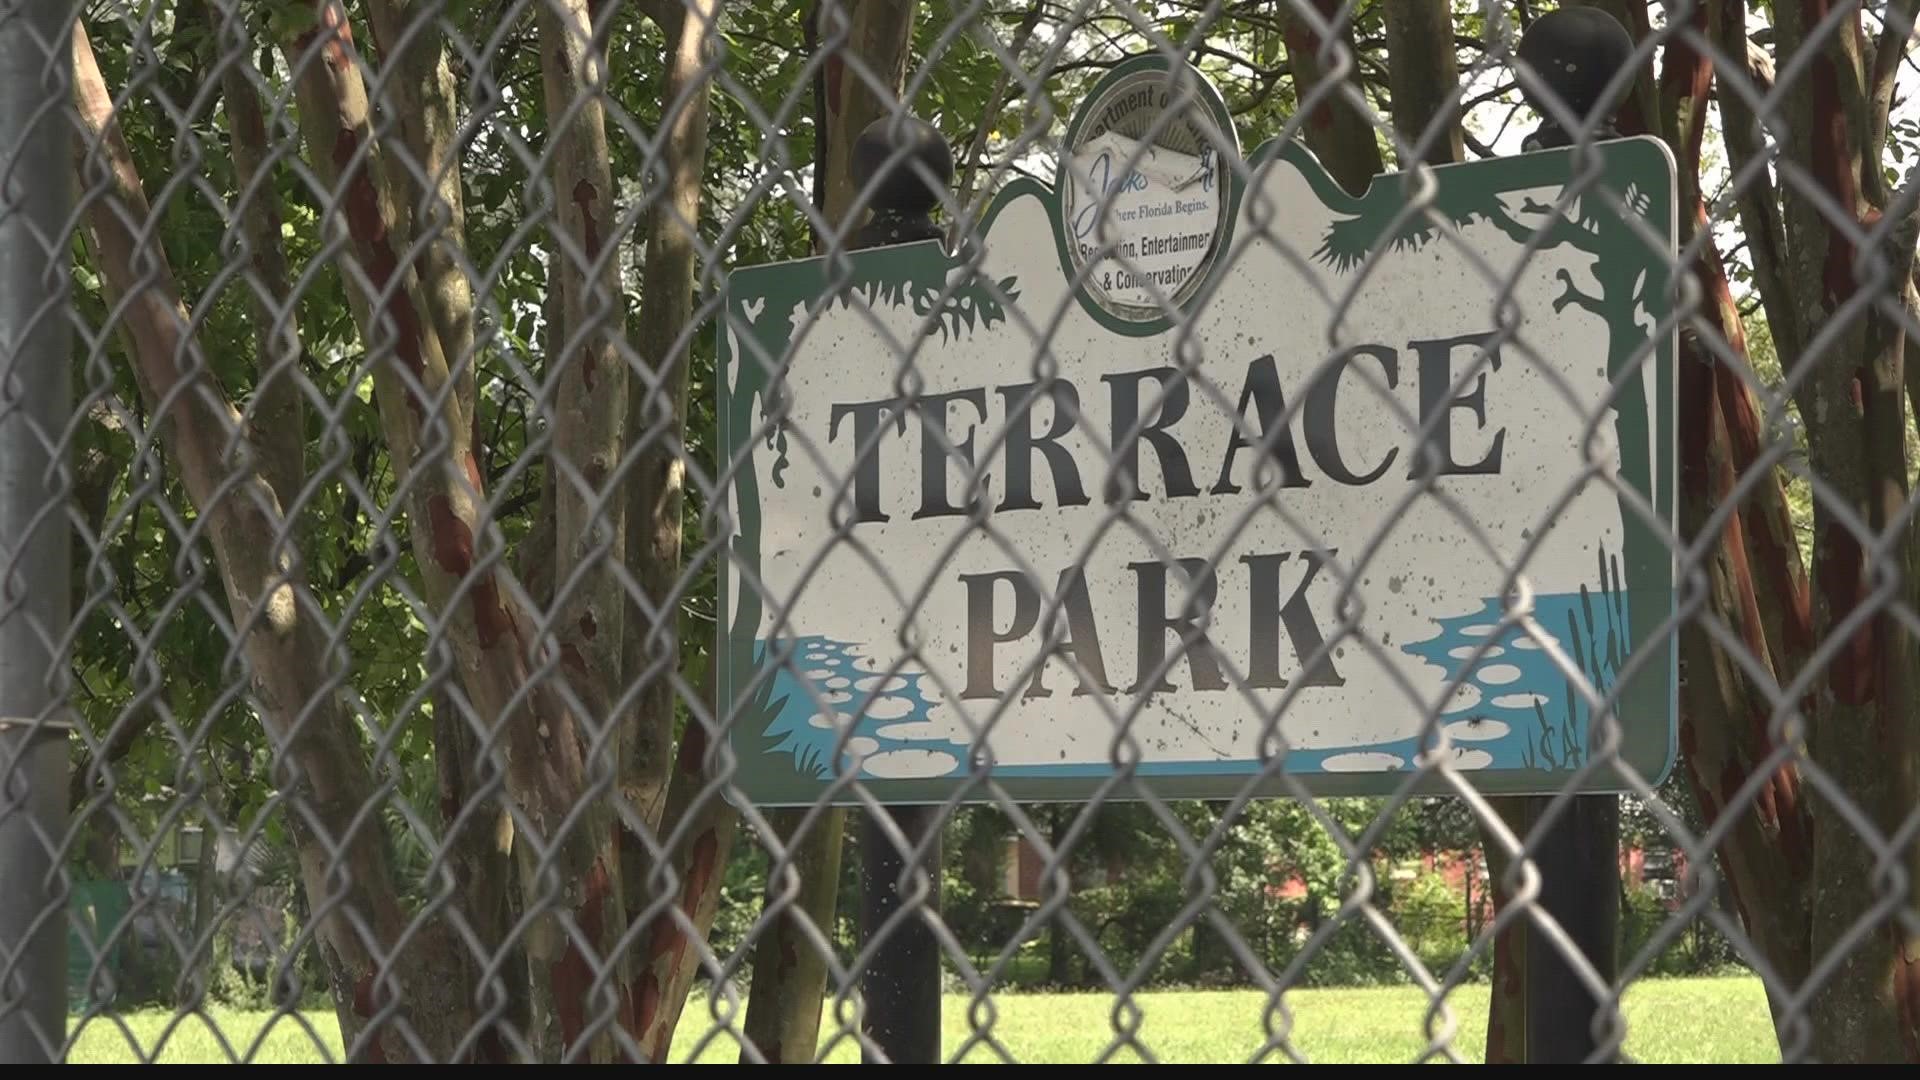 According to a police report from Jacksonville Sheriff's Office, a teenager found a body while walking his dog around the park.